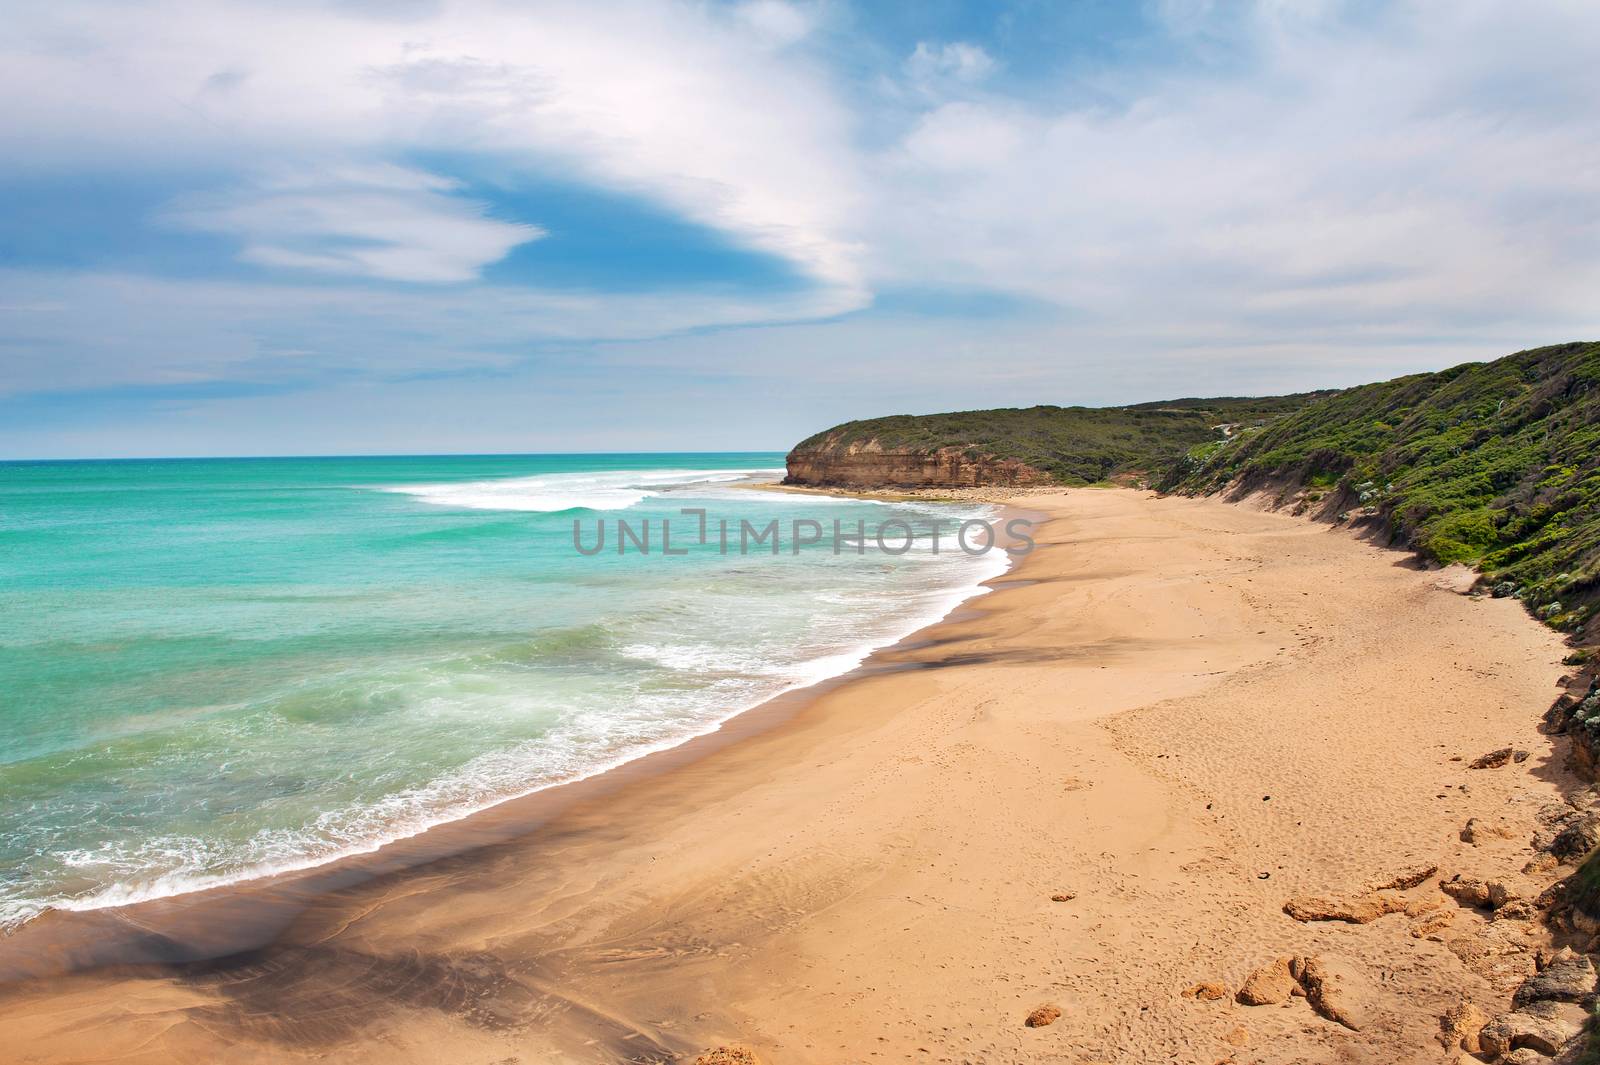 Bells beach is located approx. 100km South from Melbourne on the Great Ocean Road. It is famous movie location and for surfing competitions, Australia